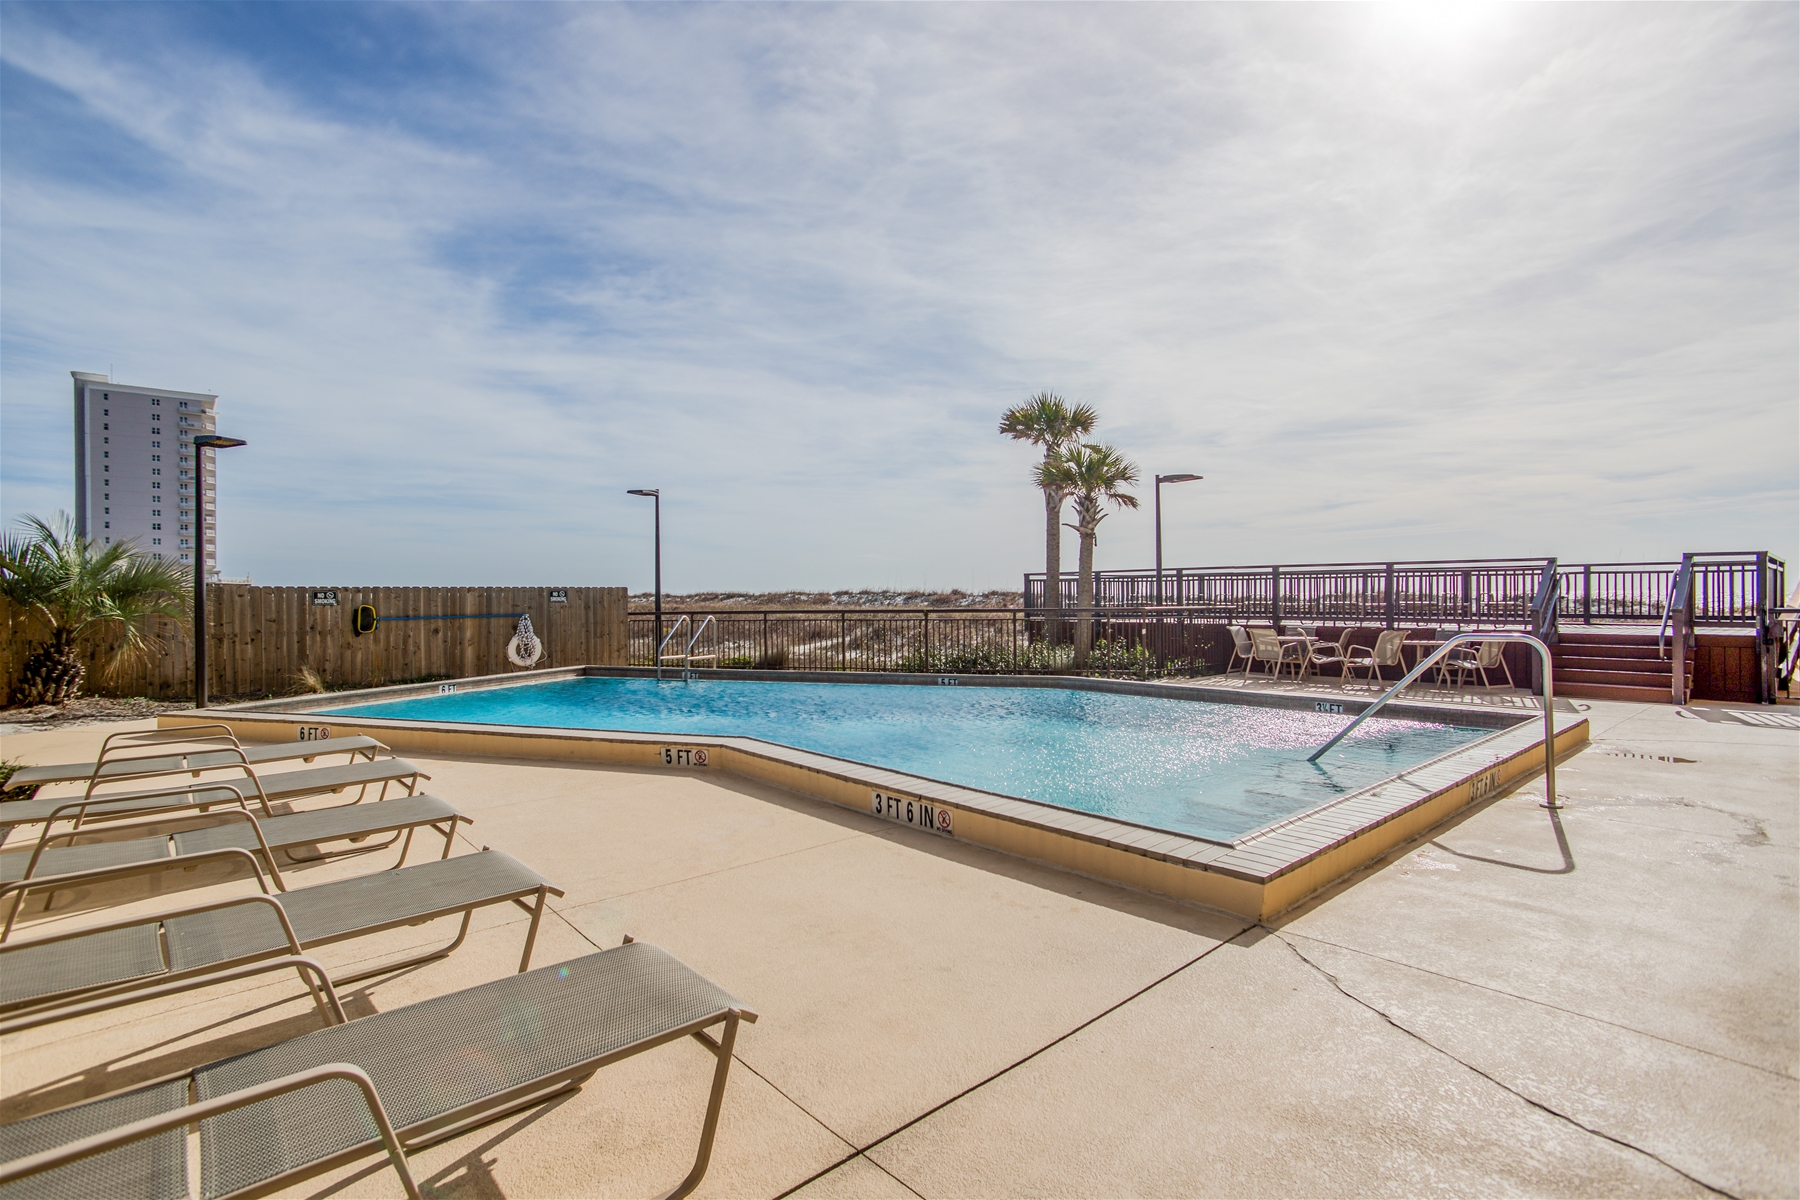 Ocean Breeze West Condos Pool And Chairs